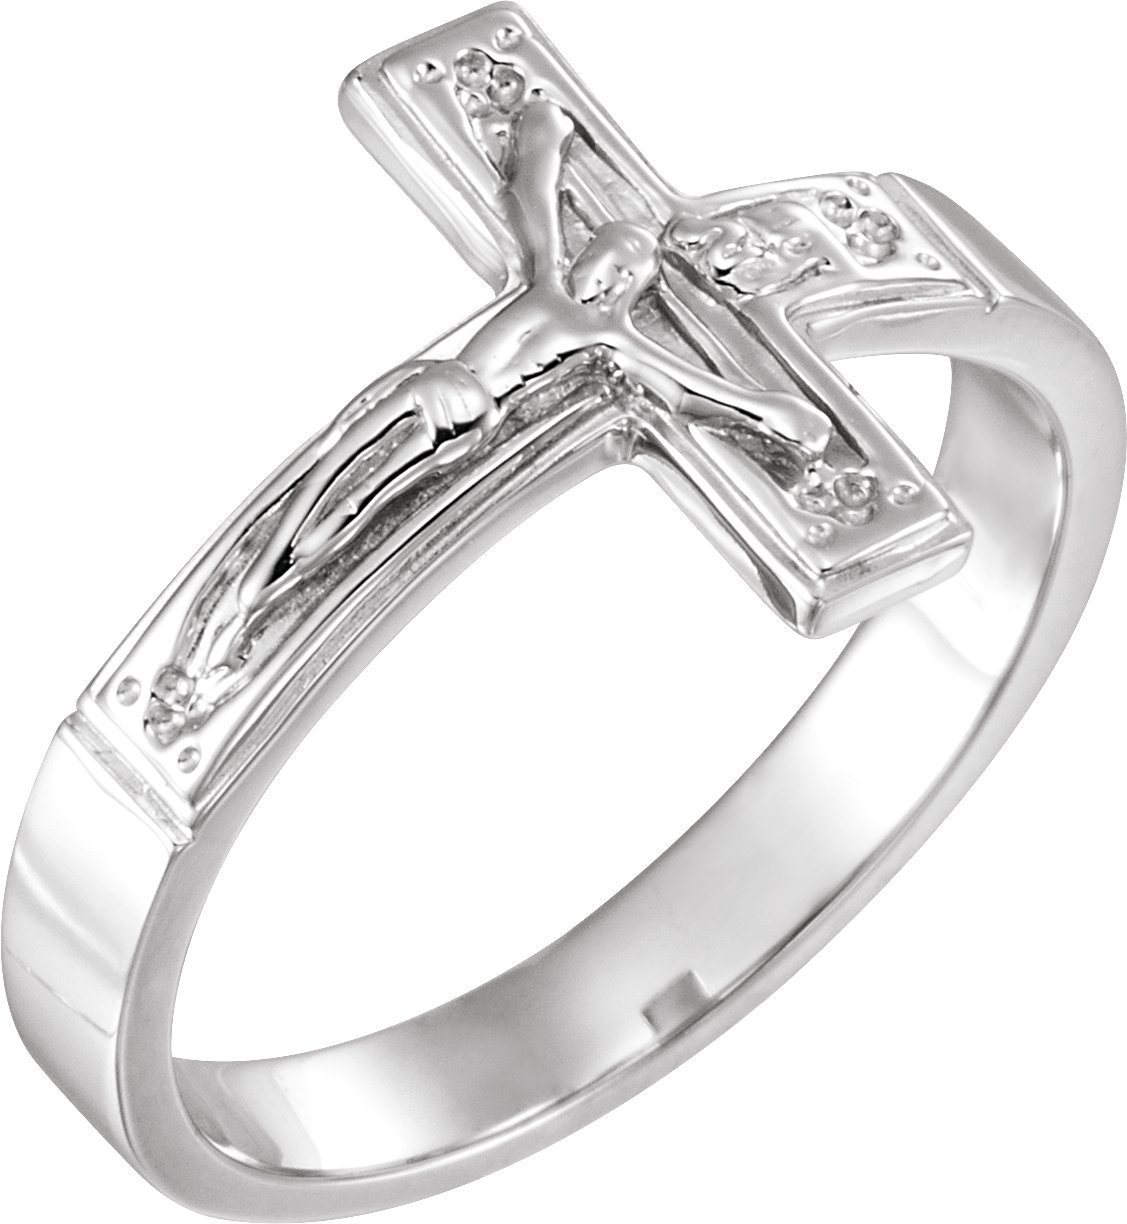 Sterling Silver 12 mm Crucifix Chastity Ring Size 5